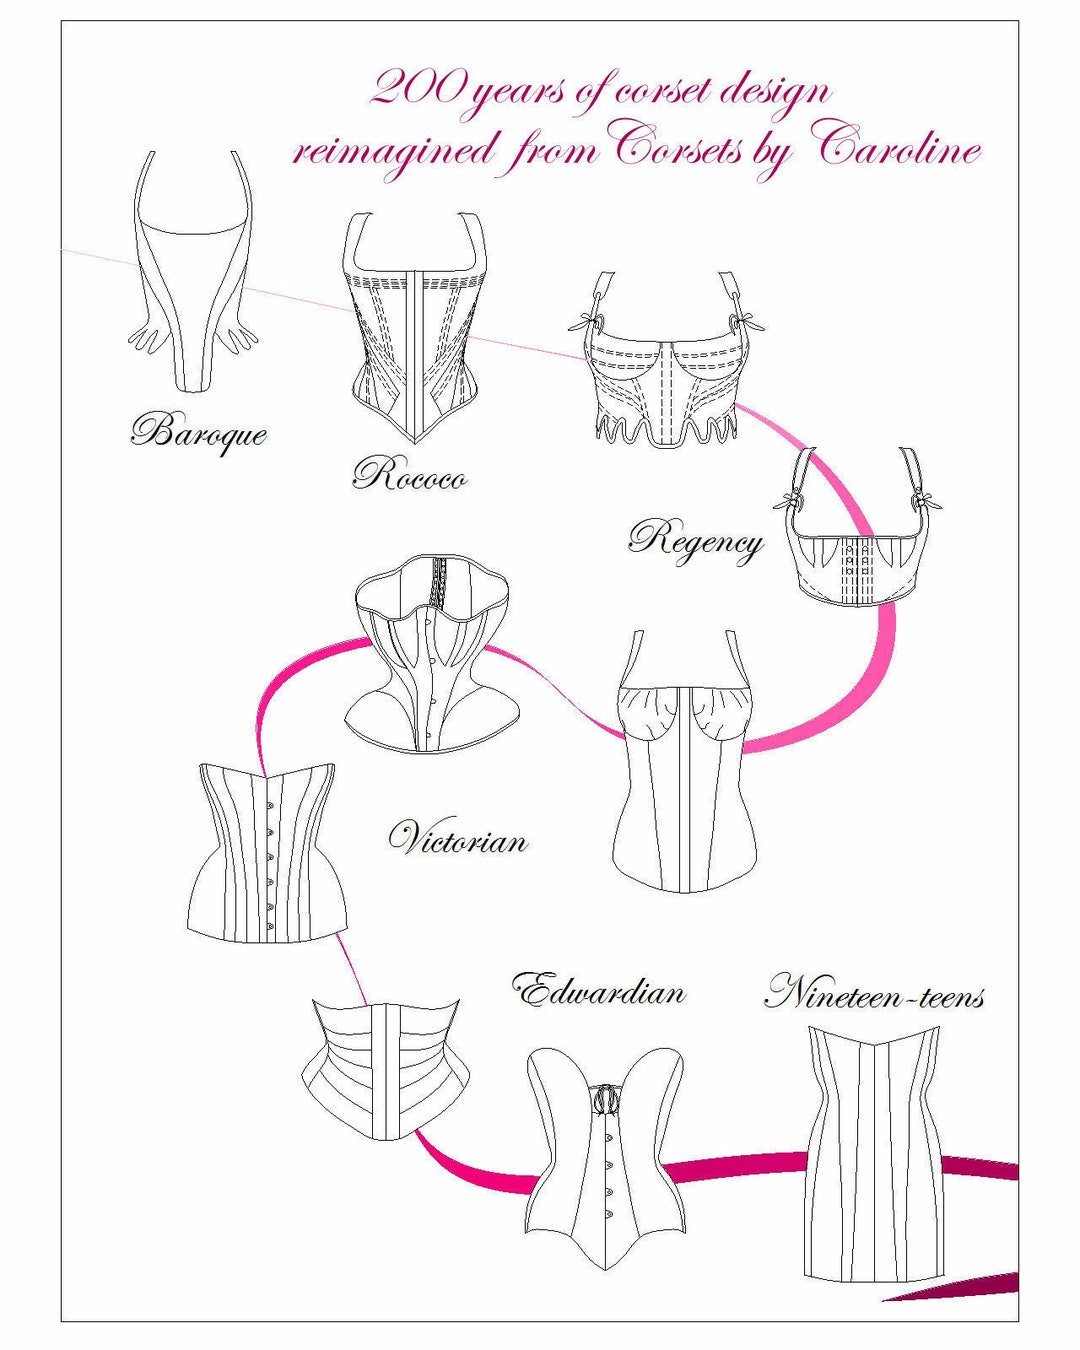 E BOOK 200 Years of Corset Design Reimagined a Collection of 10 Patterns  From 1715-1915 